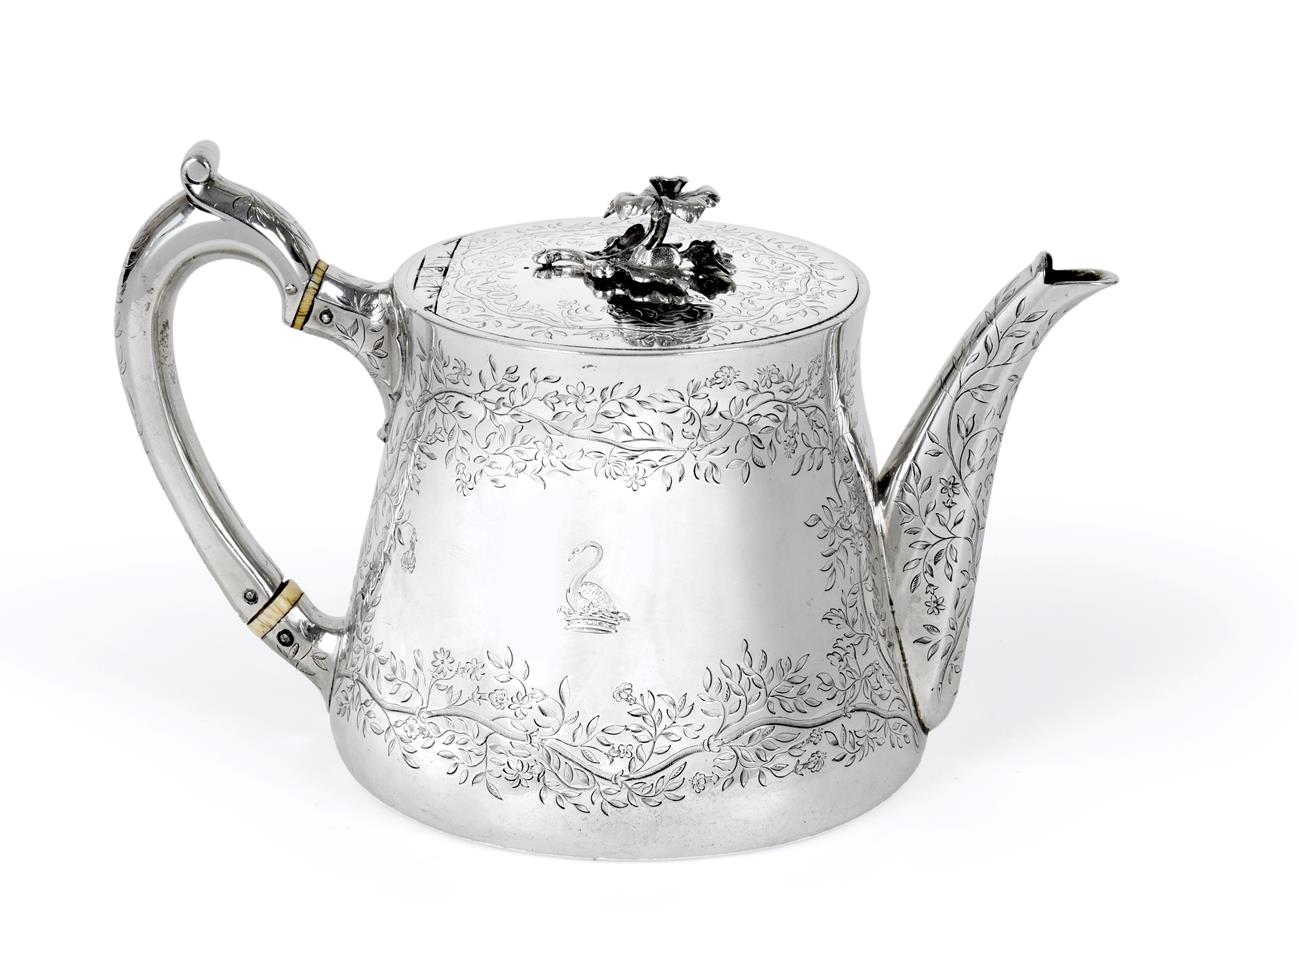 Lot 2067 - A Victorian Silver Teapot, by Robert Garrard, London, 1850, tapering and engraved with foliage, the